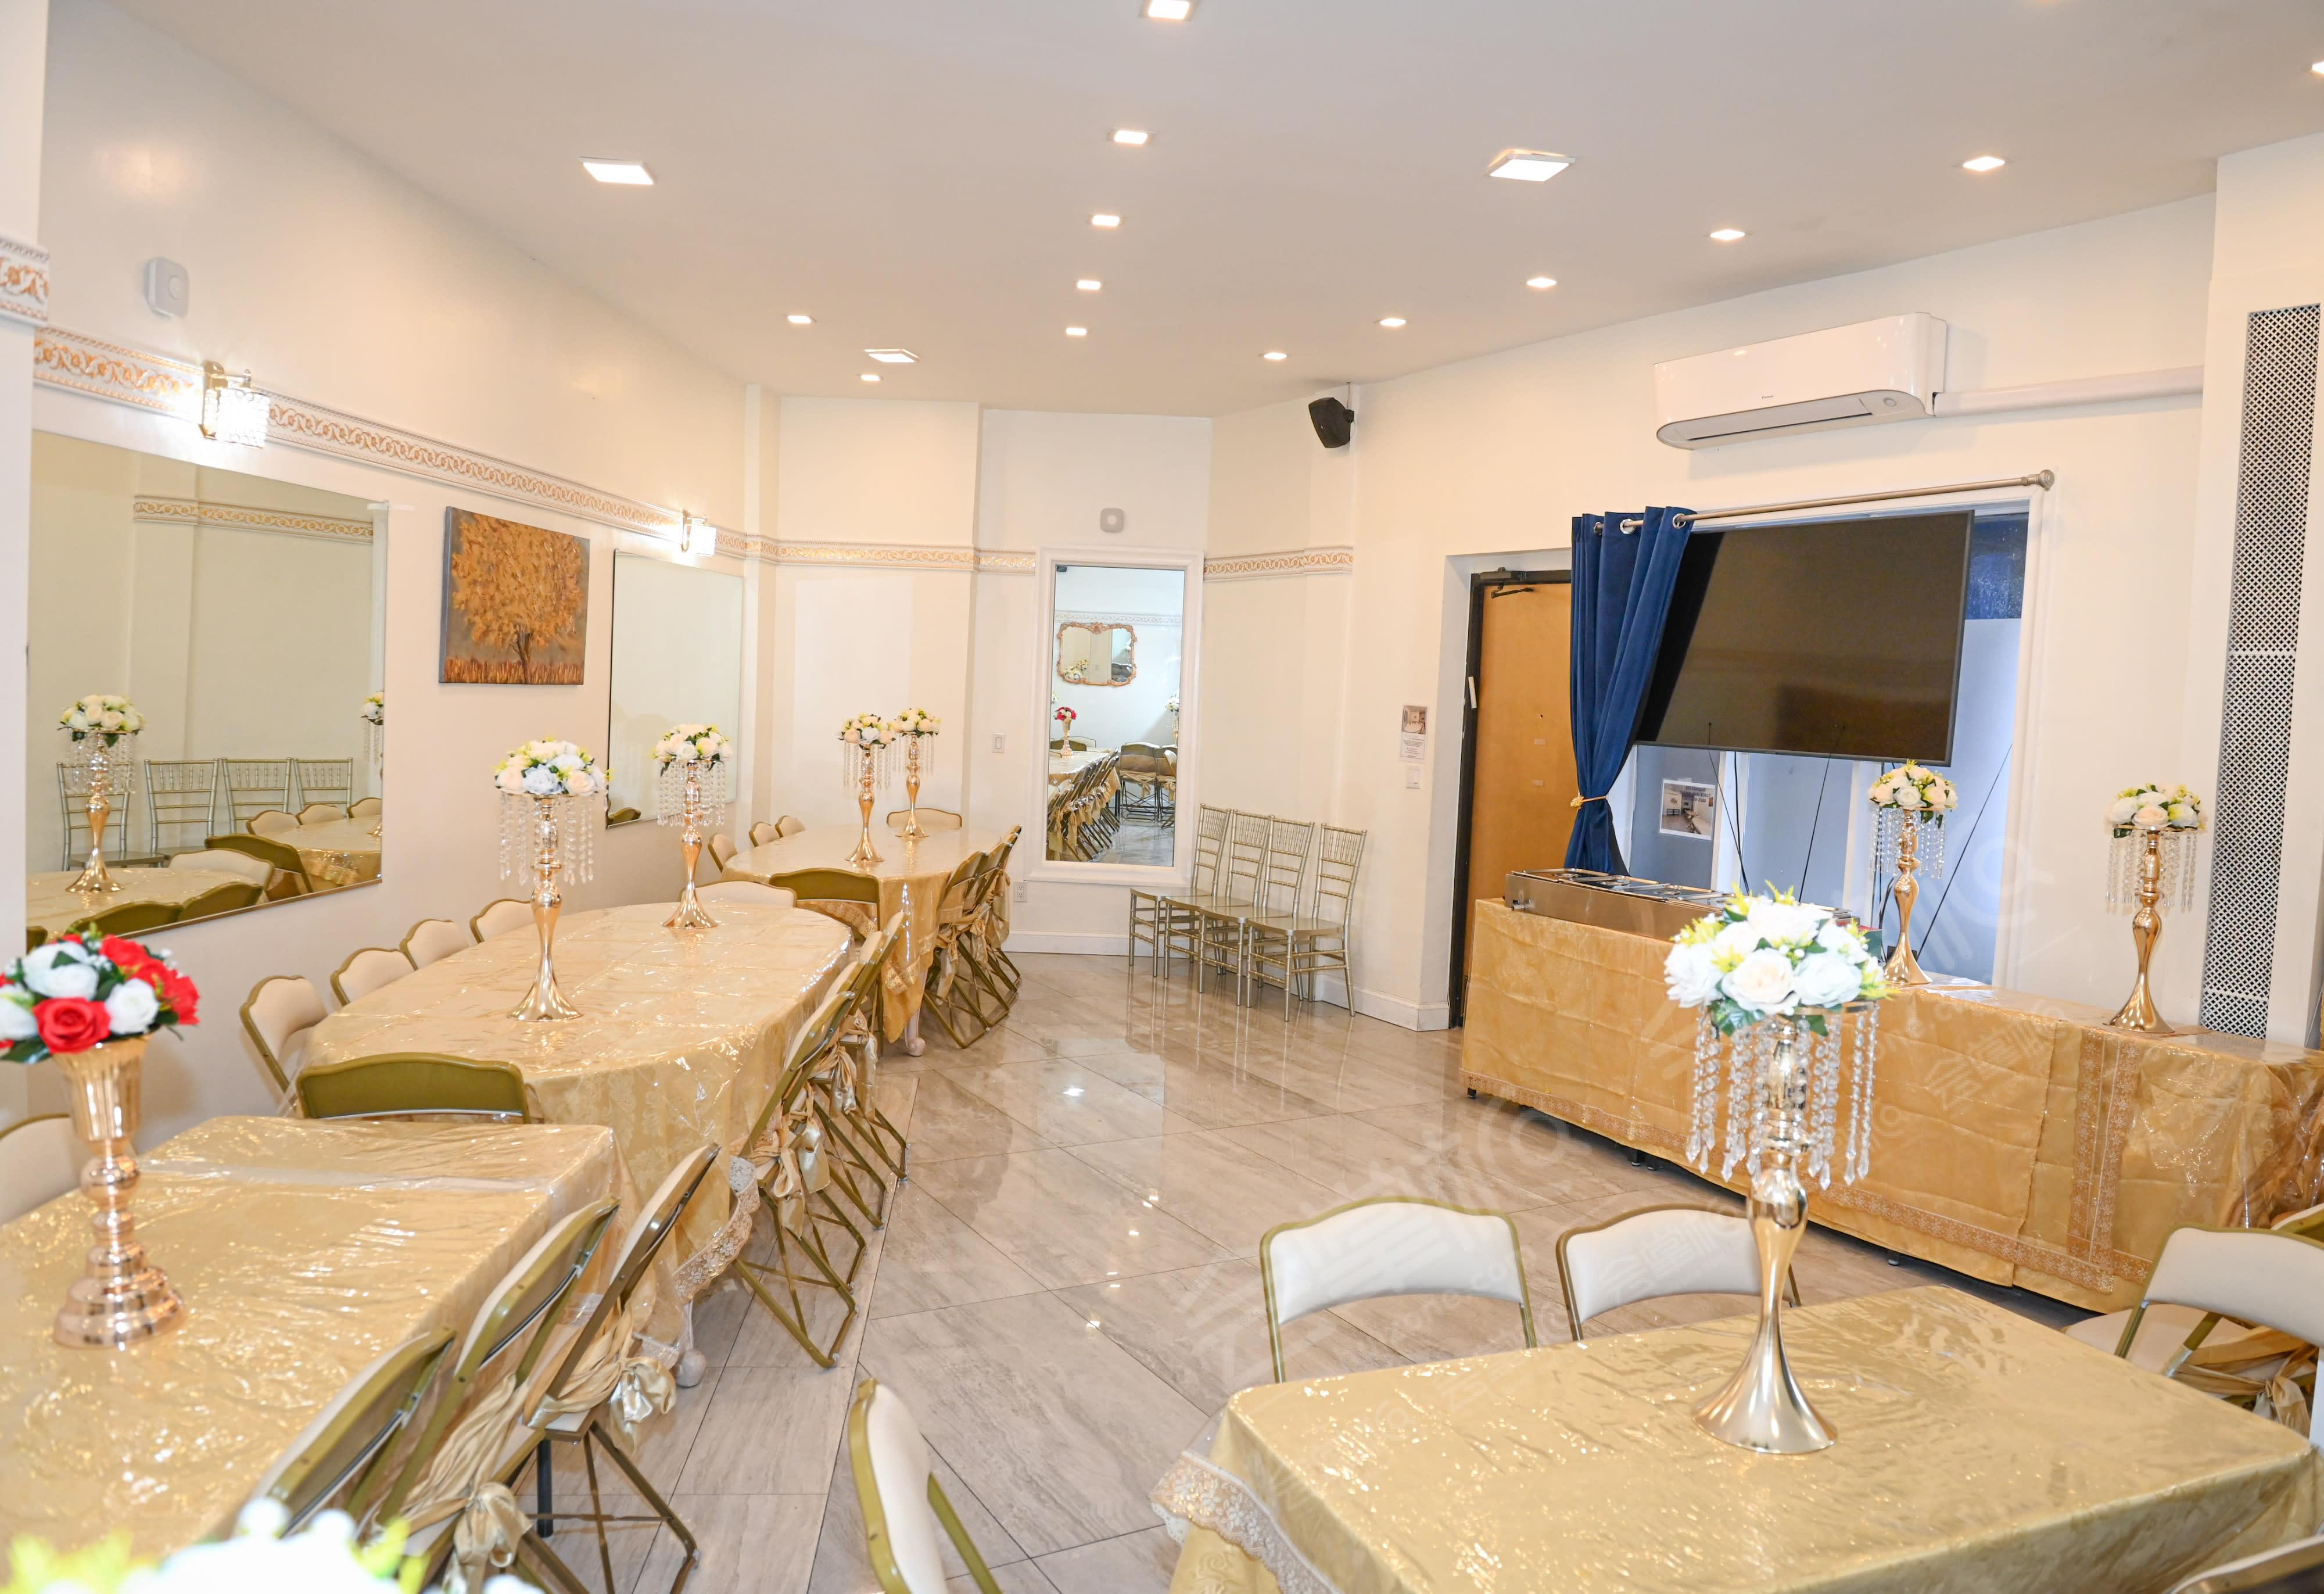 Modern Hall Only for Birthdays & Family Dinners - Bride & Groom Engagements - Business Meetings - Pop Up Shop Store